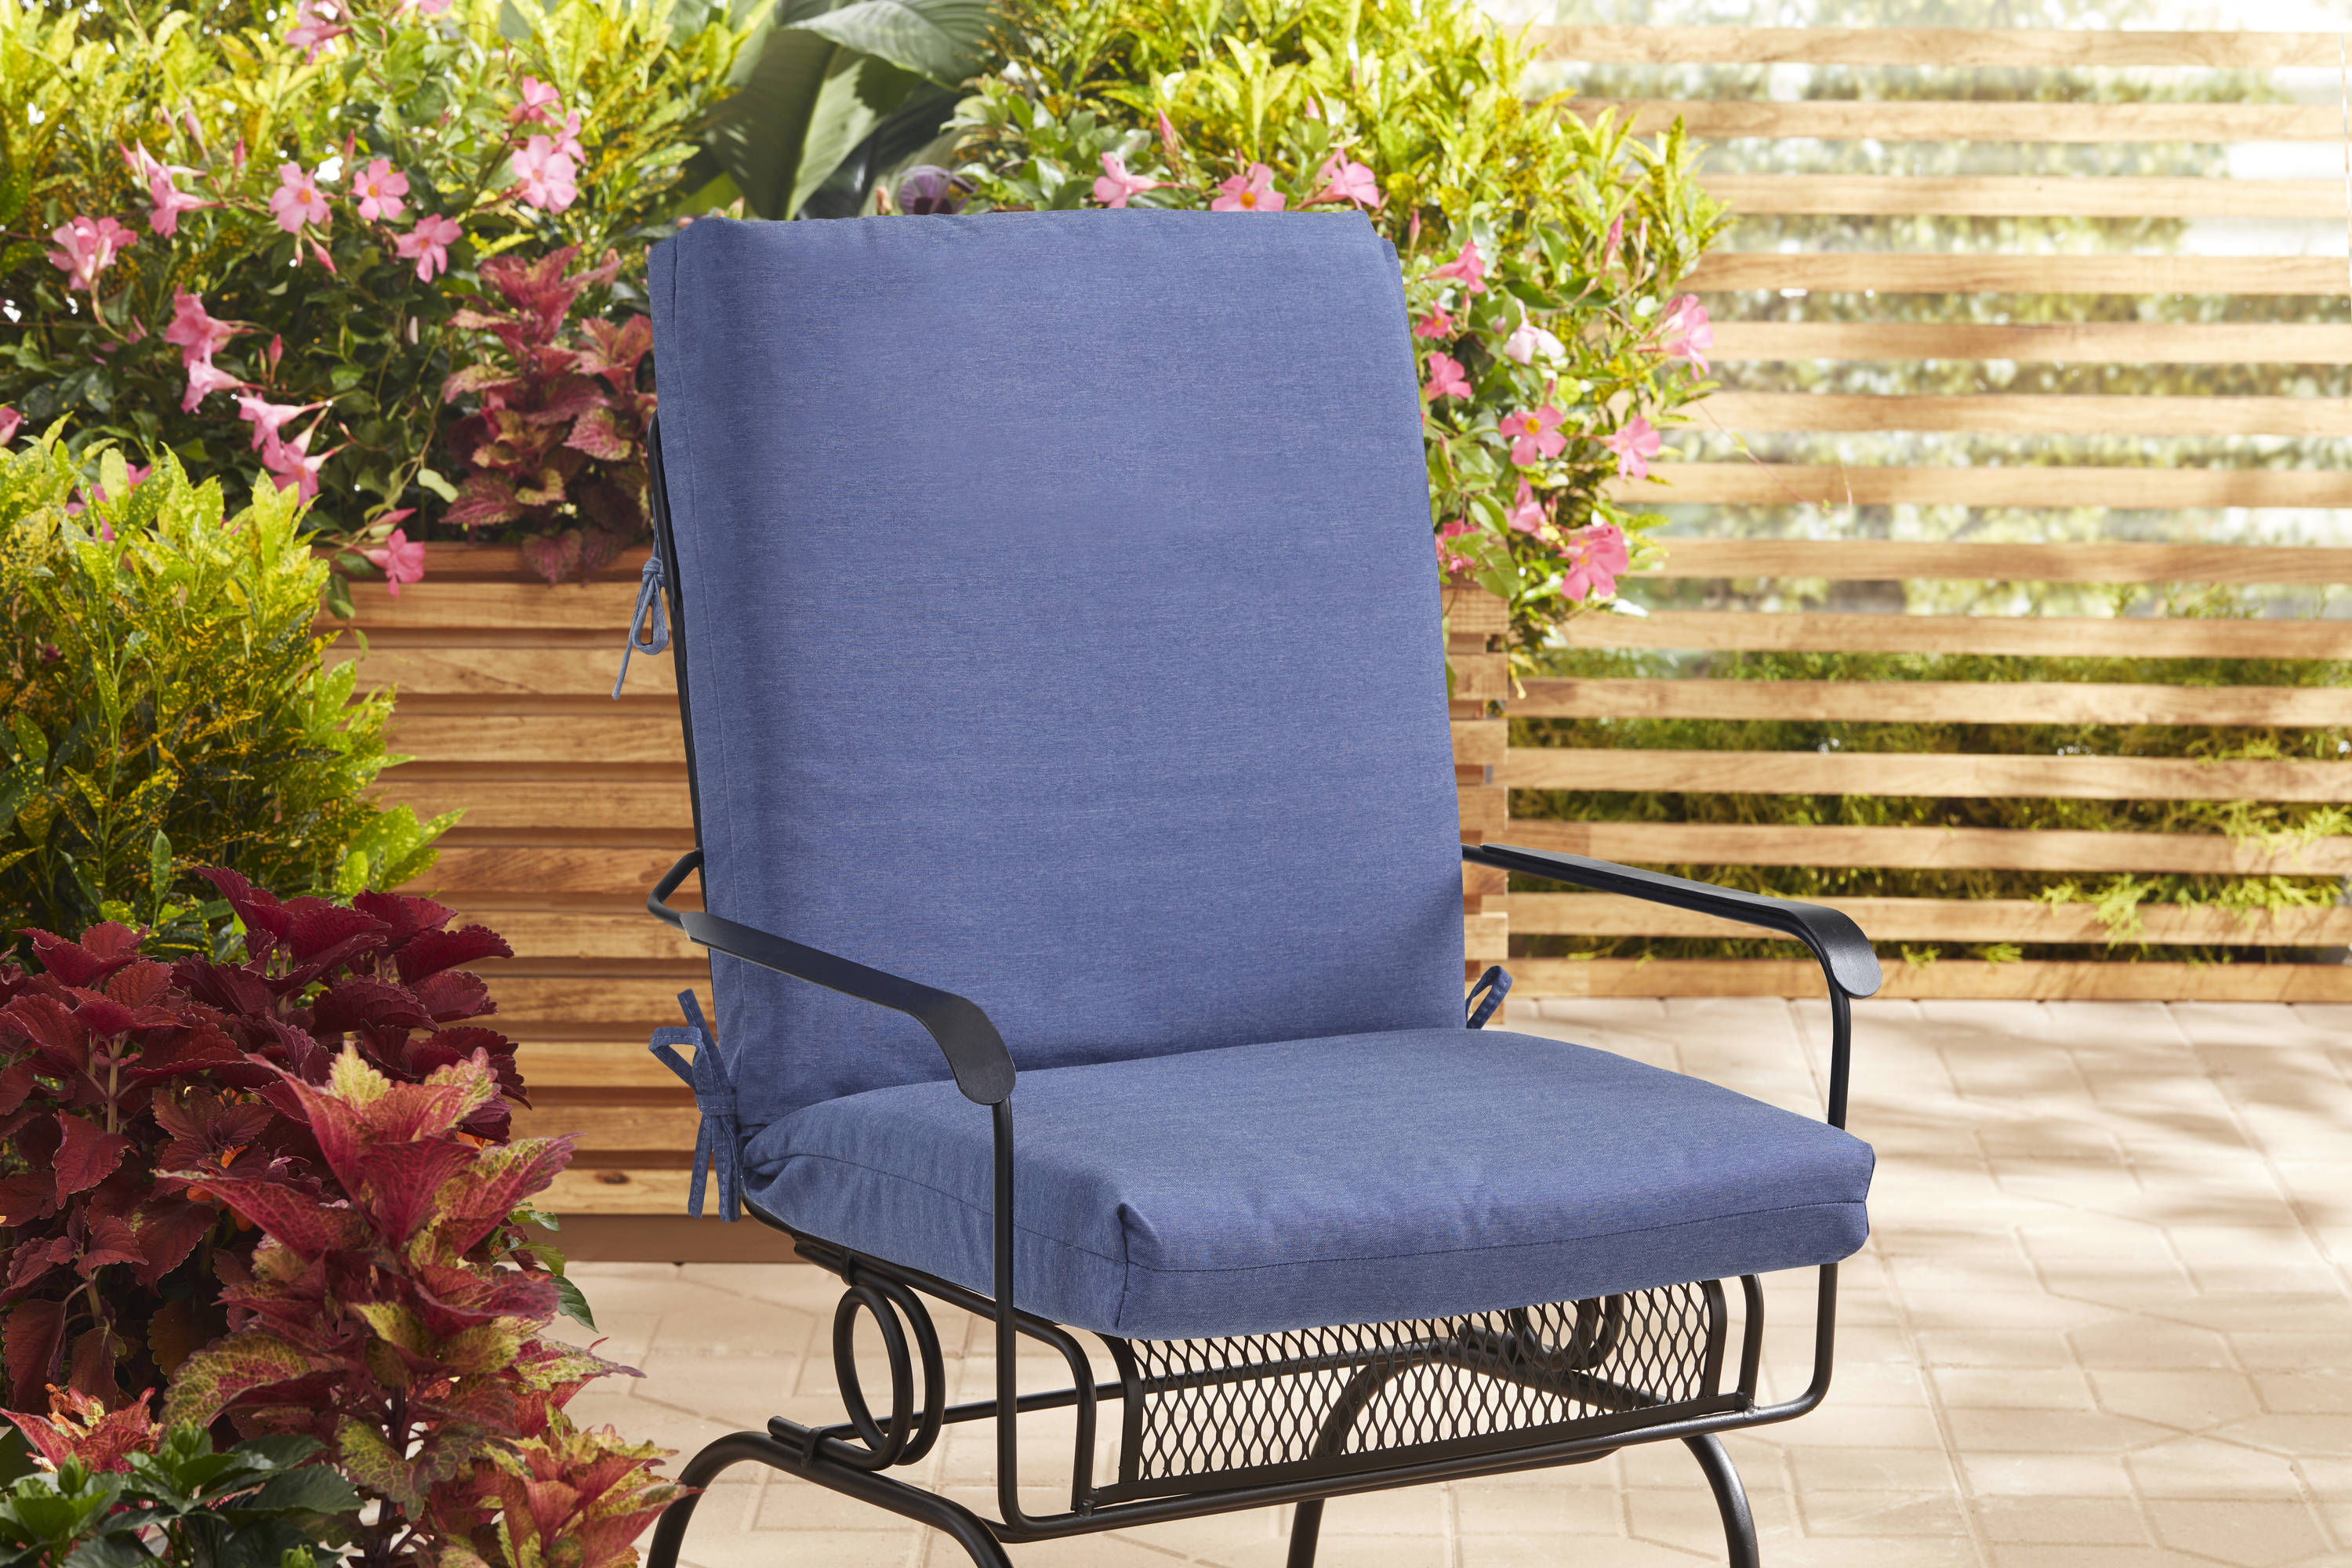 allen + roth 19.5-in x 20-in Wheat Patio Chair Cushion in the